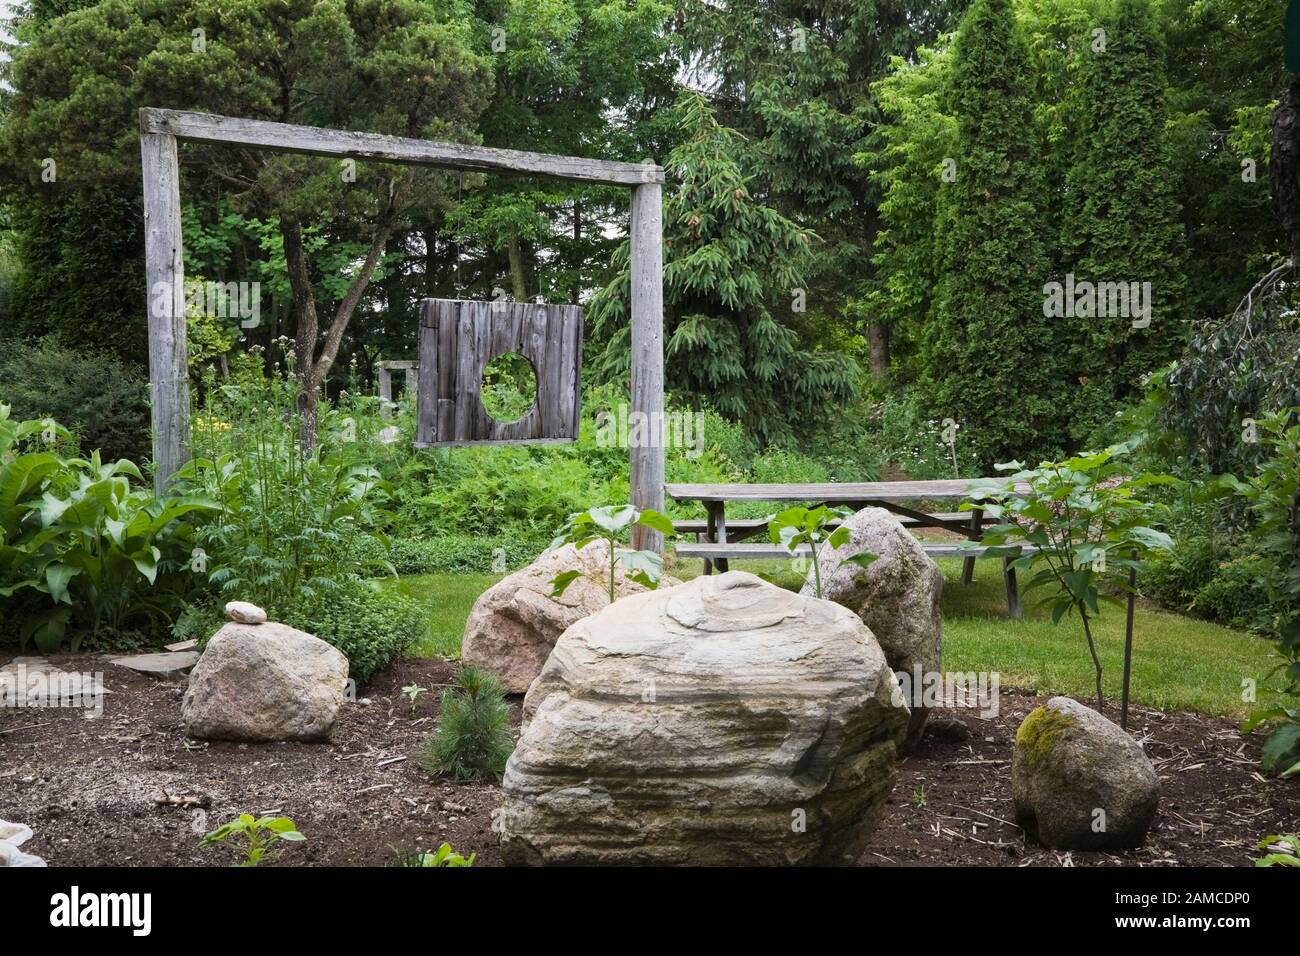 Decorative Rocks And Border Planted With Pinus Pine Tree In